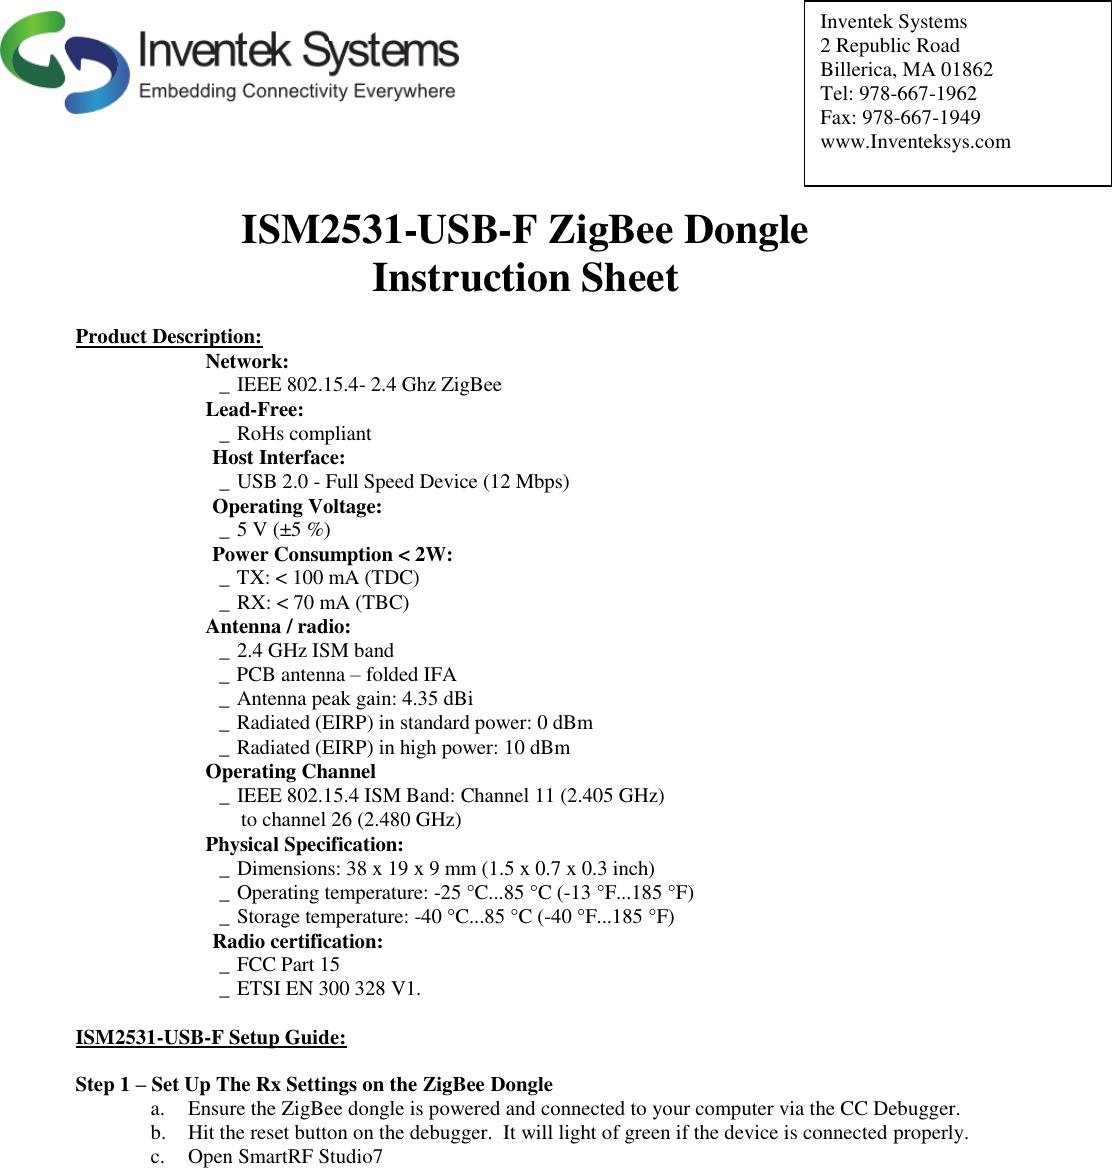          Inventek Systems 2 Republic Road Billerica, MA 01862   Tel: 978-667-1962 Fax: 978-667-1949 www.Inventeksys.com          ISM2531-USB-F ZigBee Dongle  Instruction Sheet  Product Description: Network: _ IEEE 802.15.4- 2.4 Ghz ZigBee Lead-Free: _ RoHs compliant  Host Interface: _ USB 2.0 - Full Speed Device (12 Mbps)  Operating Voltage: _ 5 V (±5 %)   Power Consumption &lt; 2W: _ TX: &lt; 100 mA (TDC) _ RX: &lt; 70 mA (TBC) Antenna / radio: _ 2.4 GHz ISM band _ PCB antenna – folded IFA _ Antenna peak gain: 4.35 dBi _ Radiated (EIRP) in standard power: 0 dBm _ Radiated (EIRP) in high power: 10 dBm Operating Channel _ IEEE 802.15.4 ISM Band: Channel 11 (2.405 GHz)    to channel 26 (2.480 GHz) Physical Specification: _ Dimensions: 38 x 19 x 9 mm (1.5 x 0.7 x 0.3 inch) _ Operating temperature: -25 °C...85 °C (-13 °F...185 °F) _ Storage temperature: -40 °C...85 °C (-40 °F...185 °F)  Radio certification: _ FCC Part 15   _ ETSI EN 300 328 V1.  ISM2531-USB-F Setup Guide:  Step 1 – Set Up The Rx Settings on the ZigBee Dongle a. Ensure the ZigBee dongle is powered and connected to your computer via the CC Debugger.  b. Hit the reset button on the debugger.  It will light of green if the device is connected properly. c. Open SmartRF Studio7             